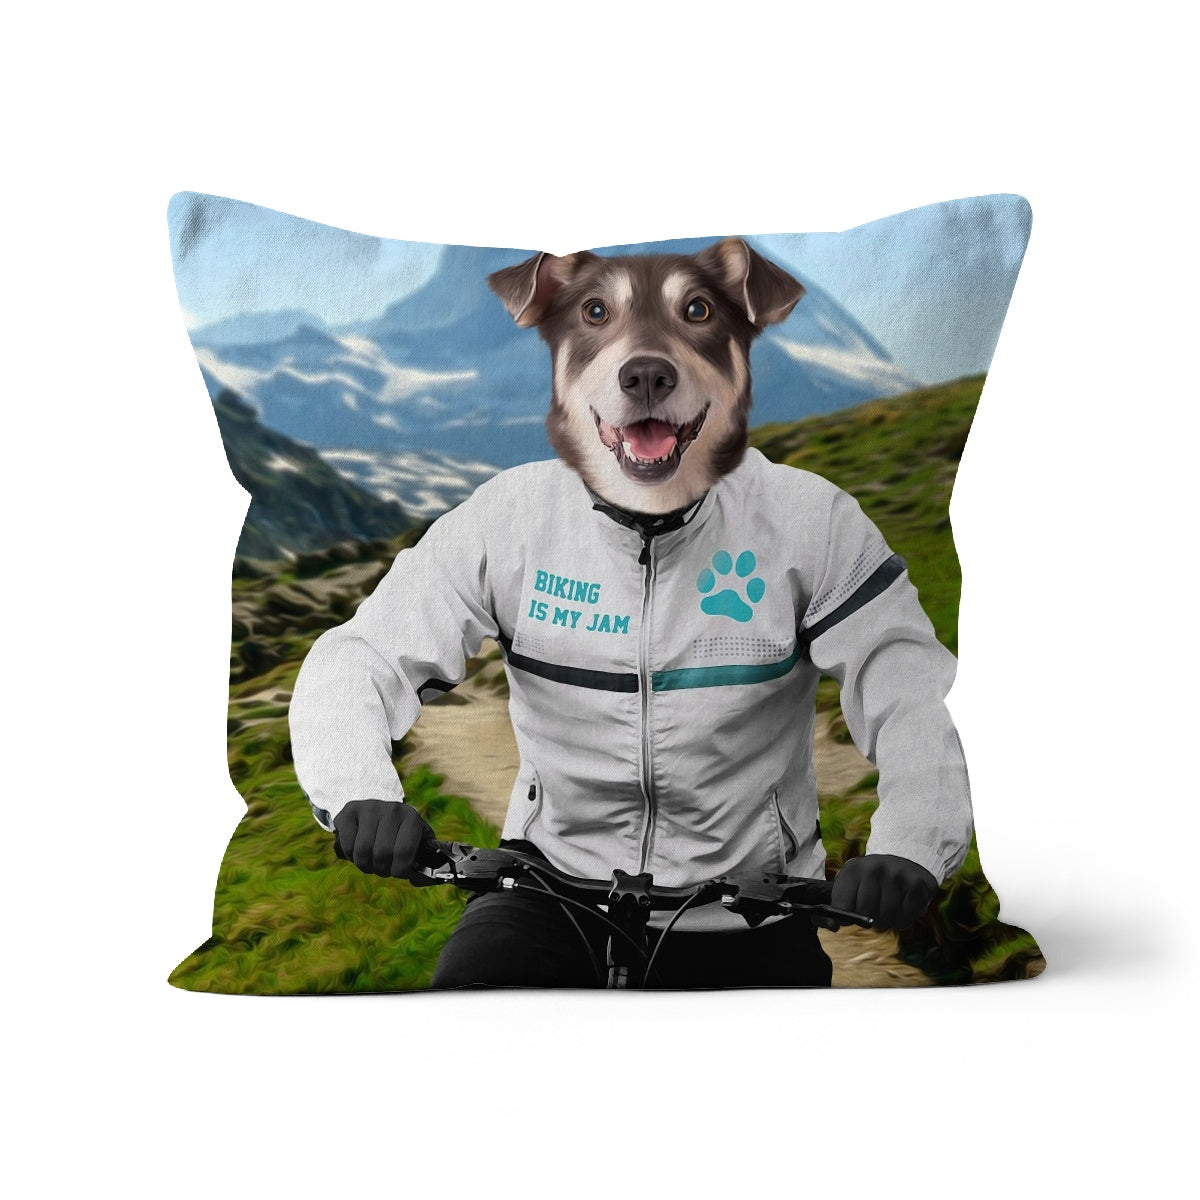 Paw & Glory, paw and glory, dog personalized pillow, pillows with dogs picture, throw pillow personalized, my pet pillow, pet picture on pillow, pillow of your dog, Pet Portrait cushion